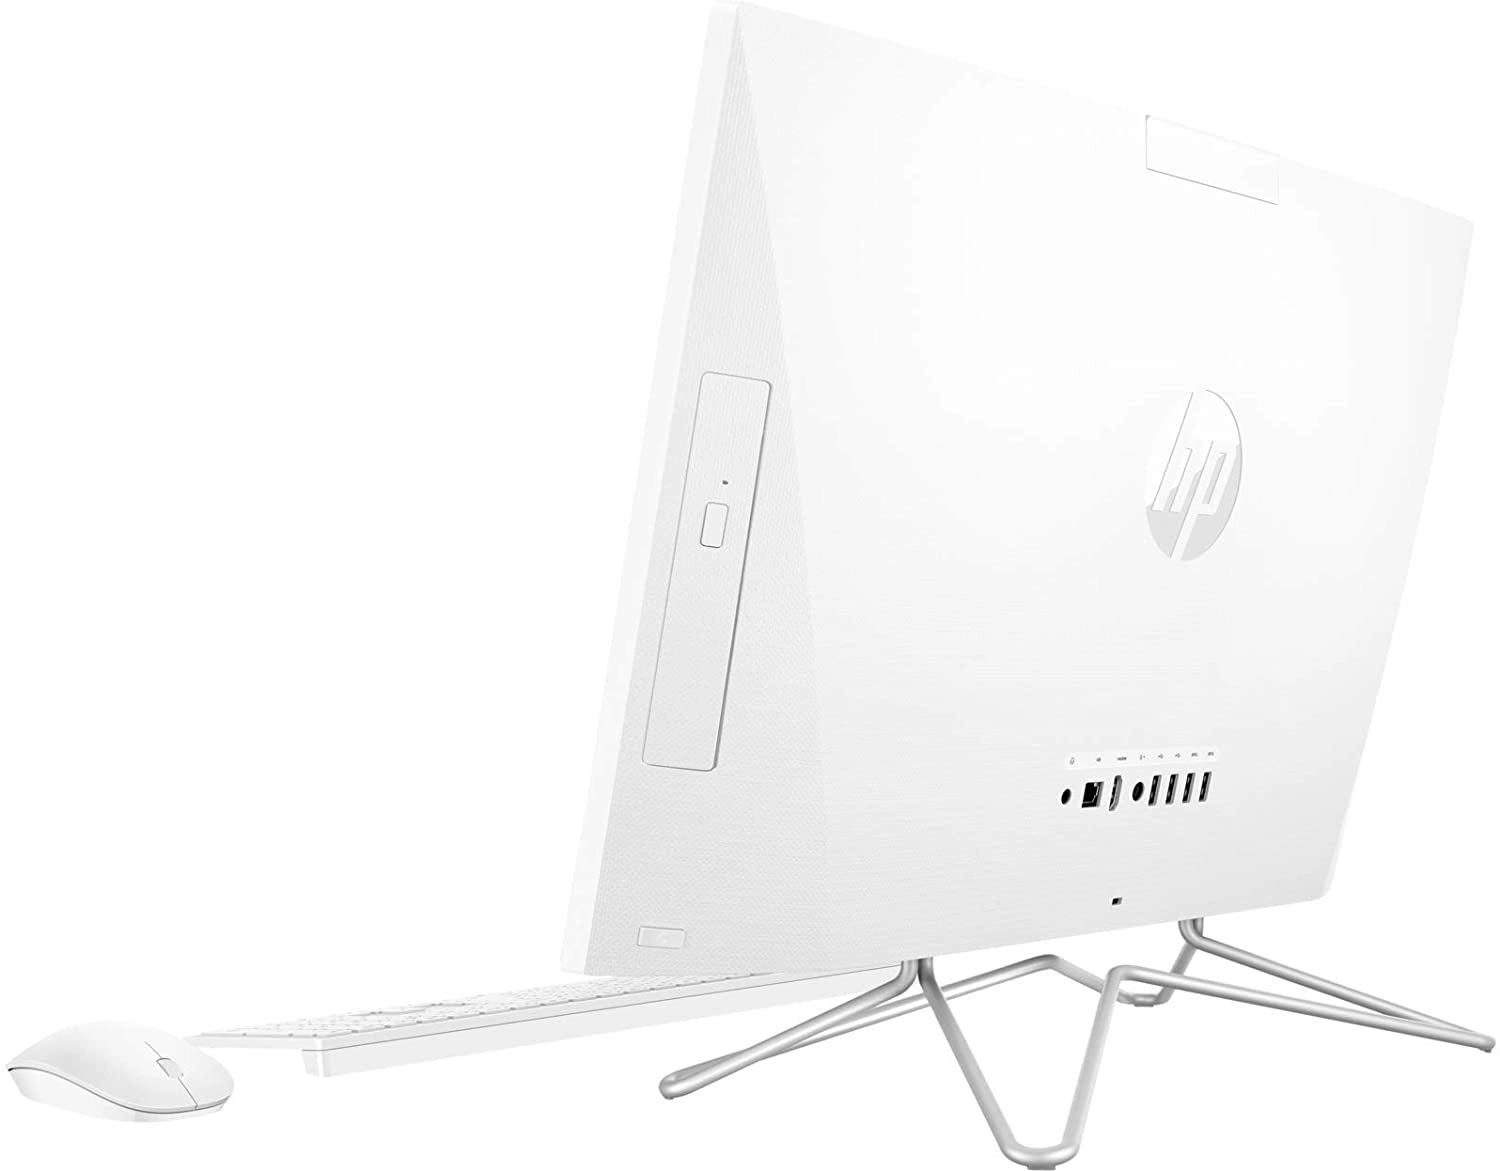 HP All-in-One 24-df0024ns laptop image